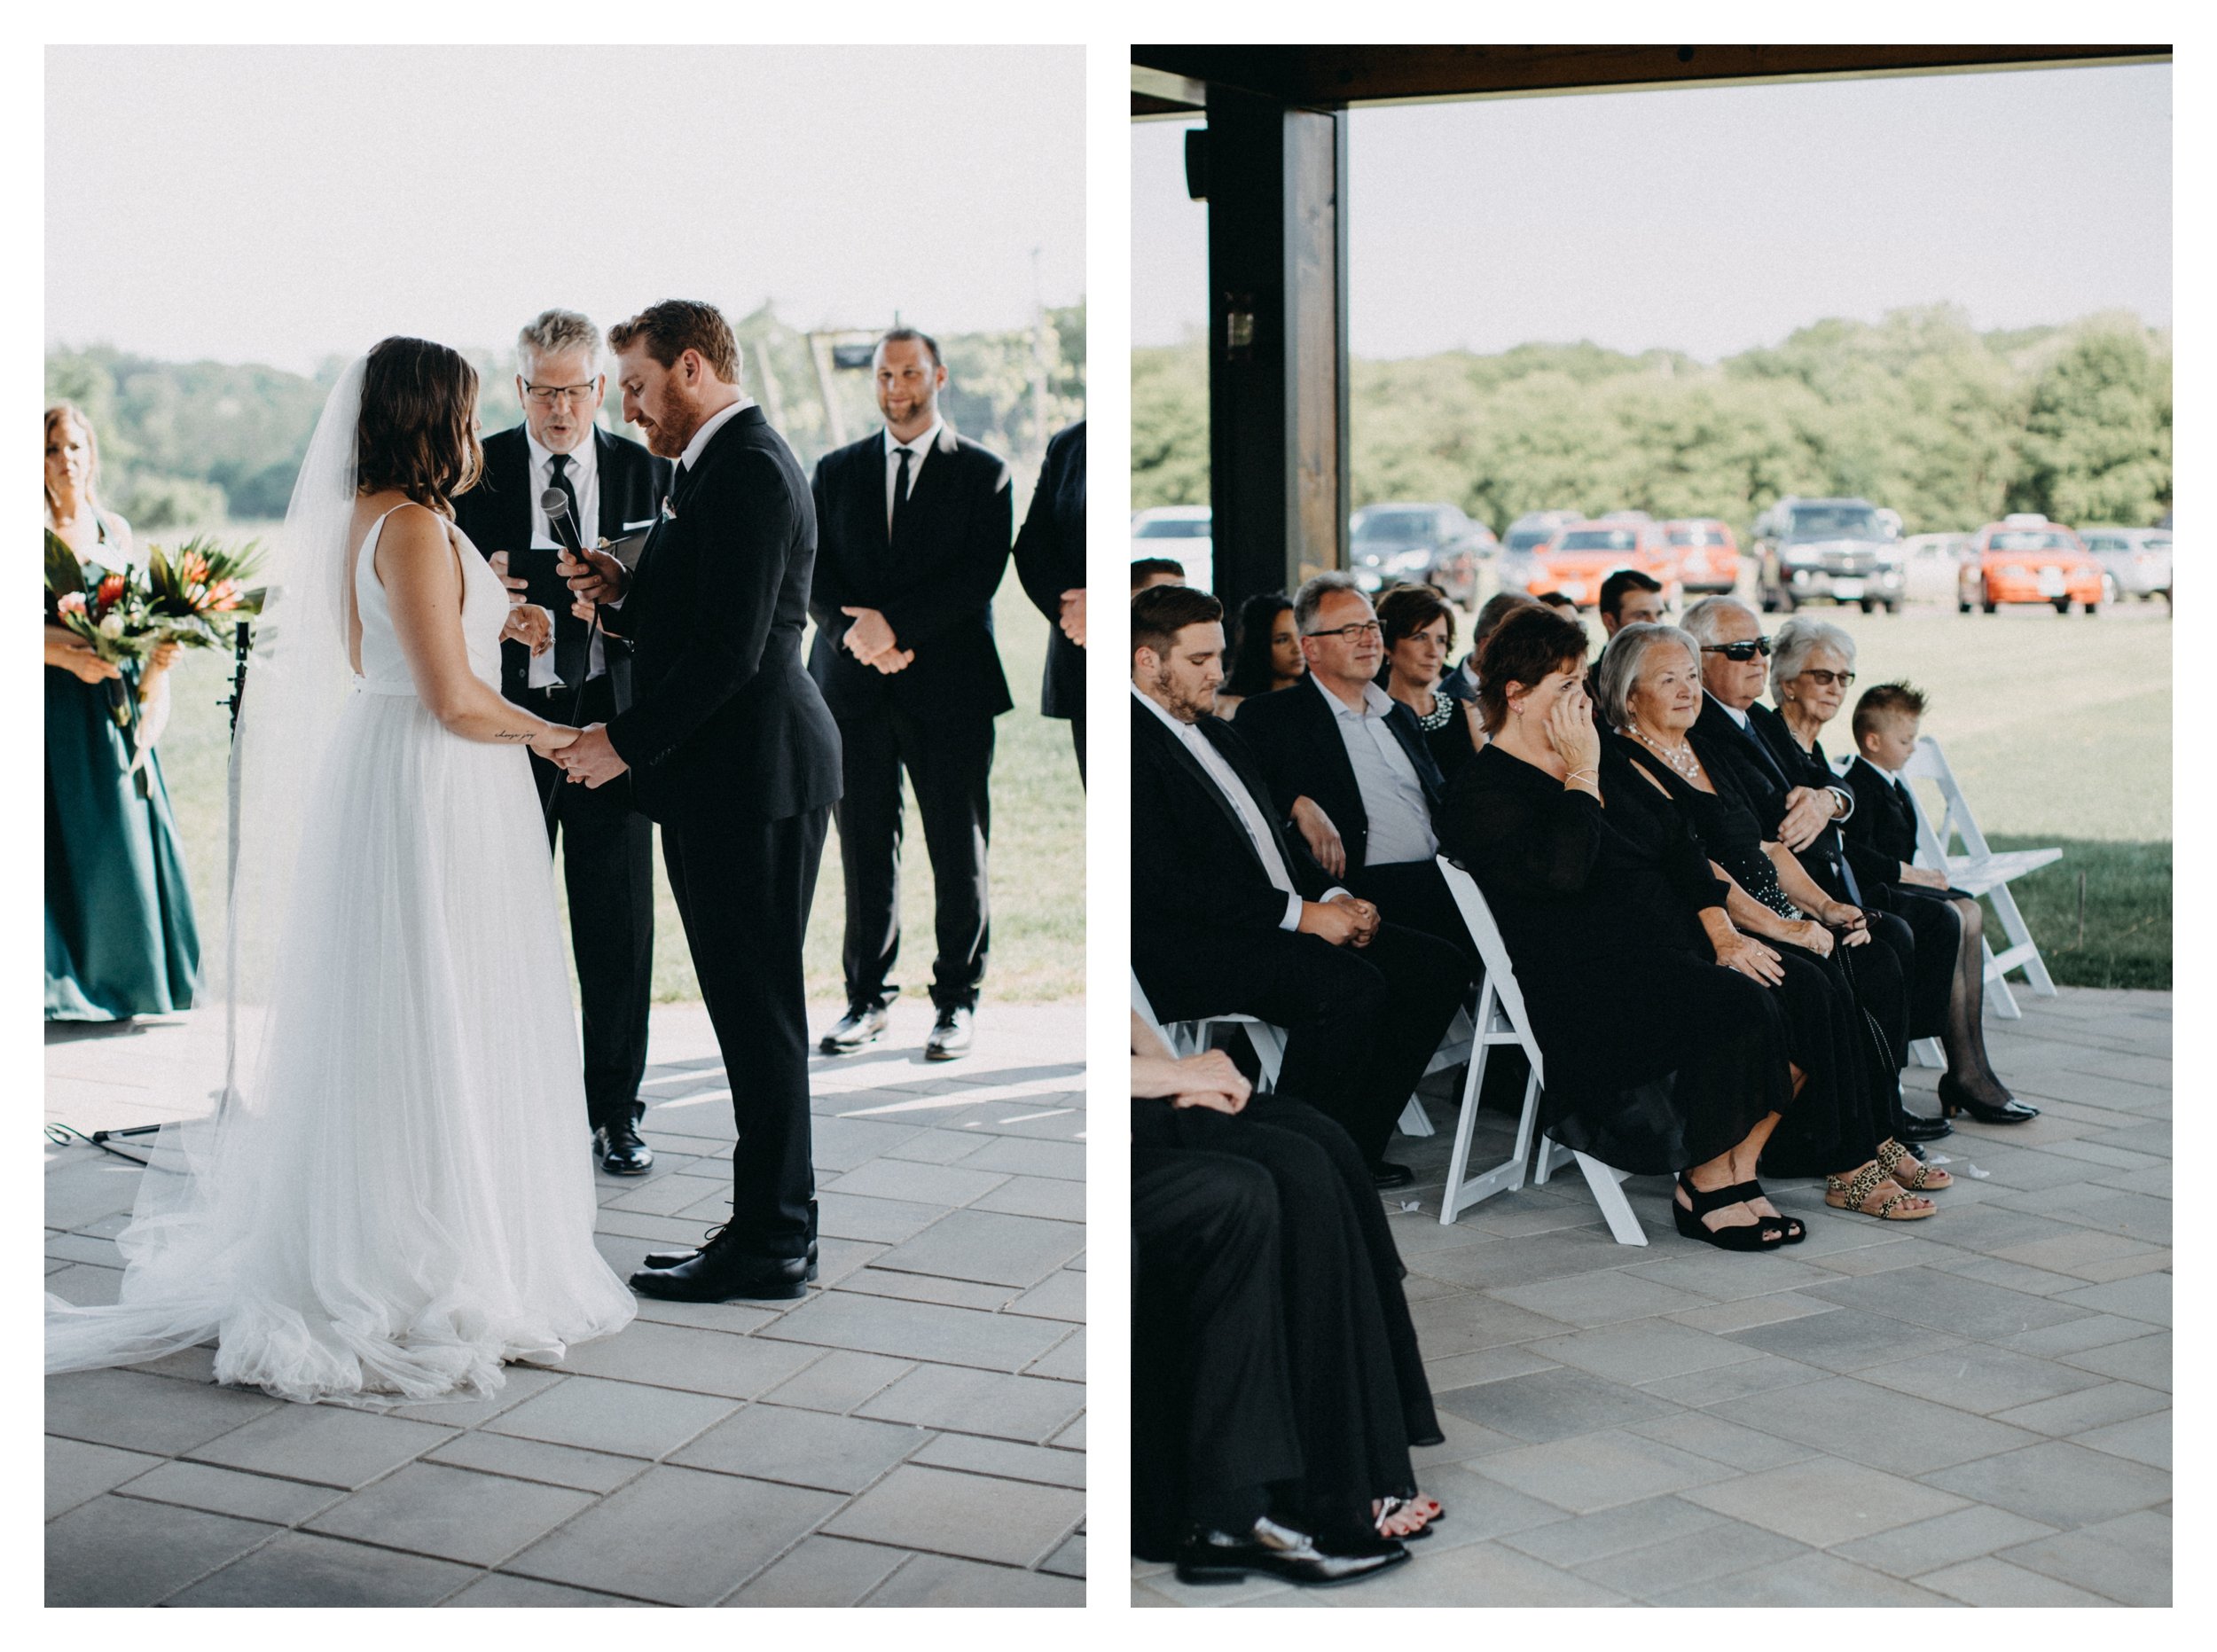 Mother of the bride crying during wedding ceremony as the bride and groom exchange vows overlooking a Minnesota vineyard wedding venue